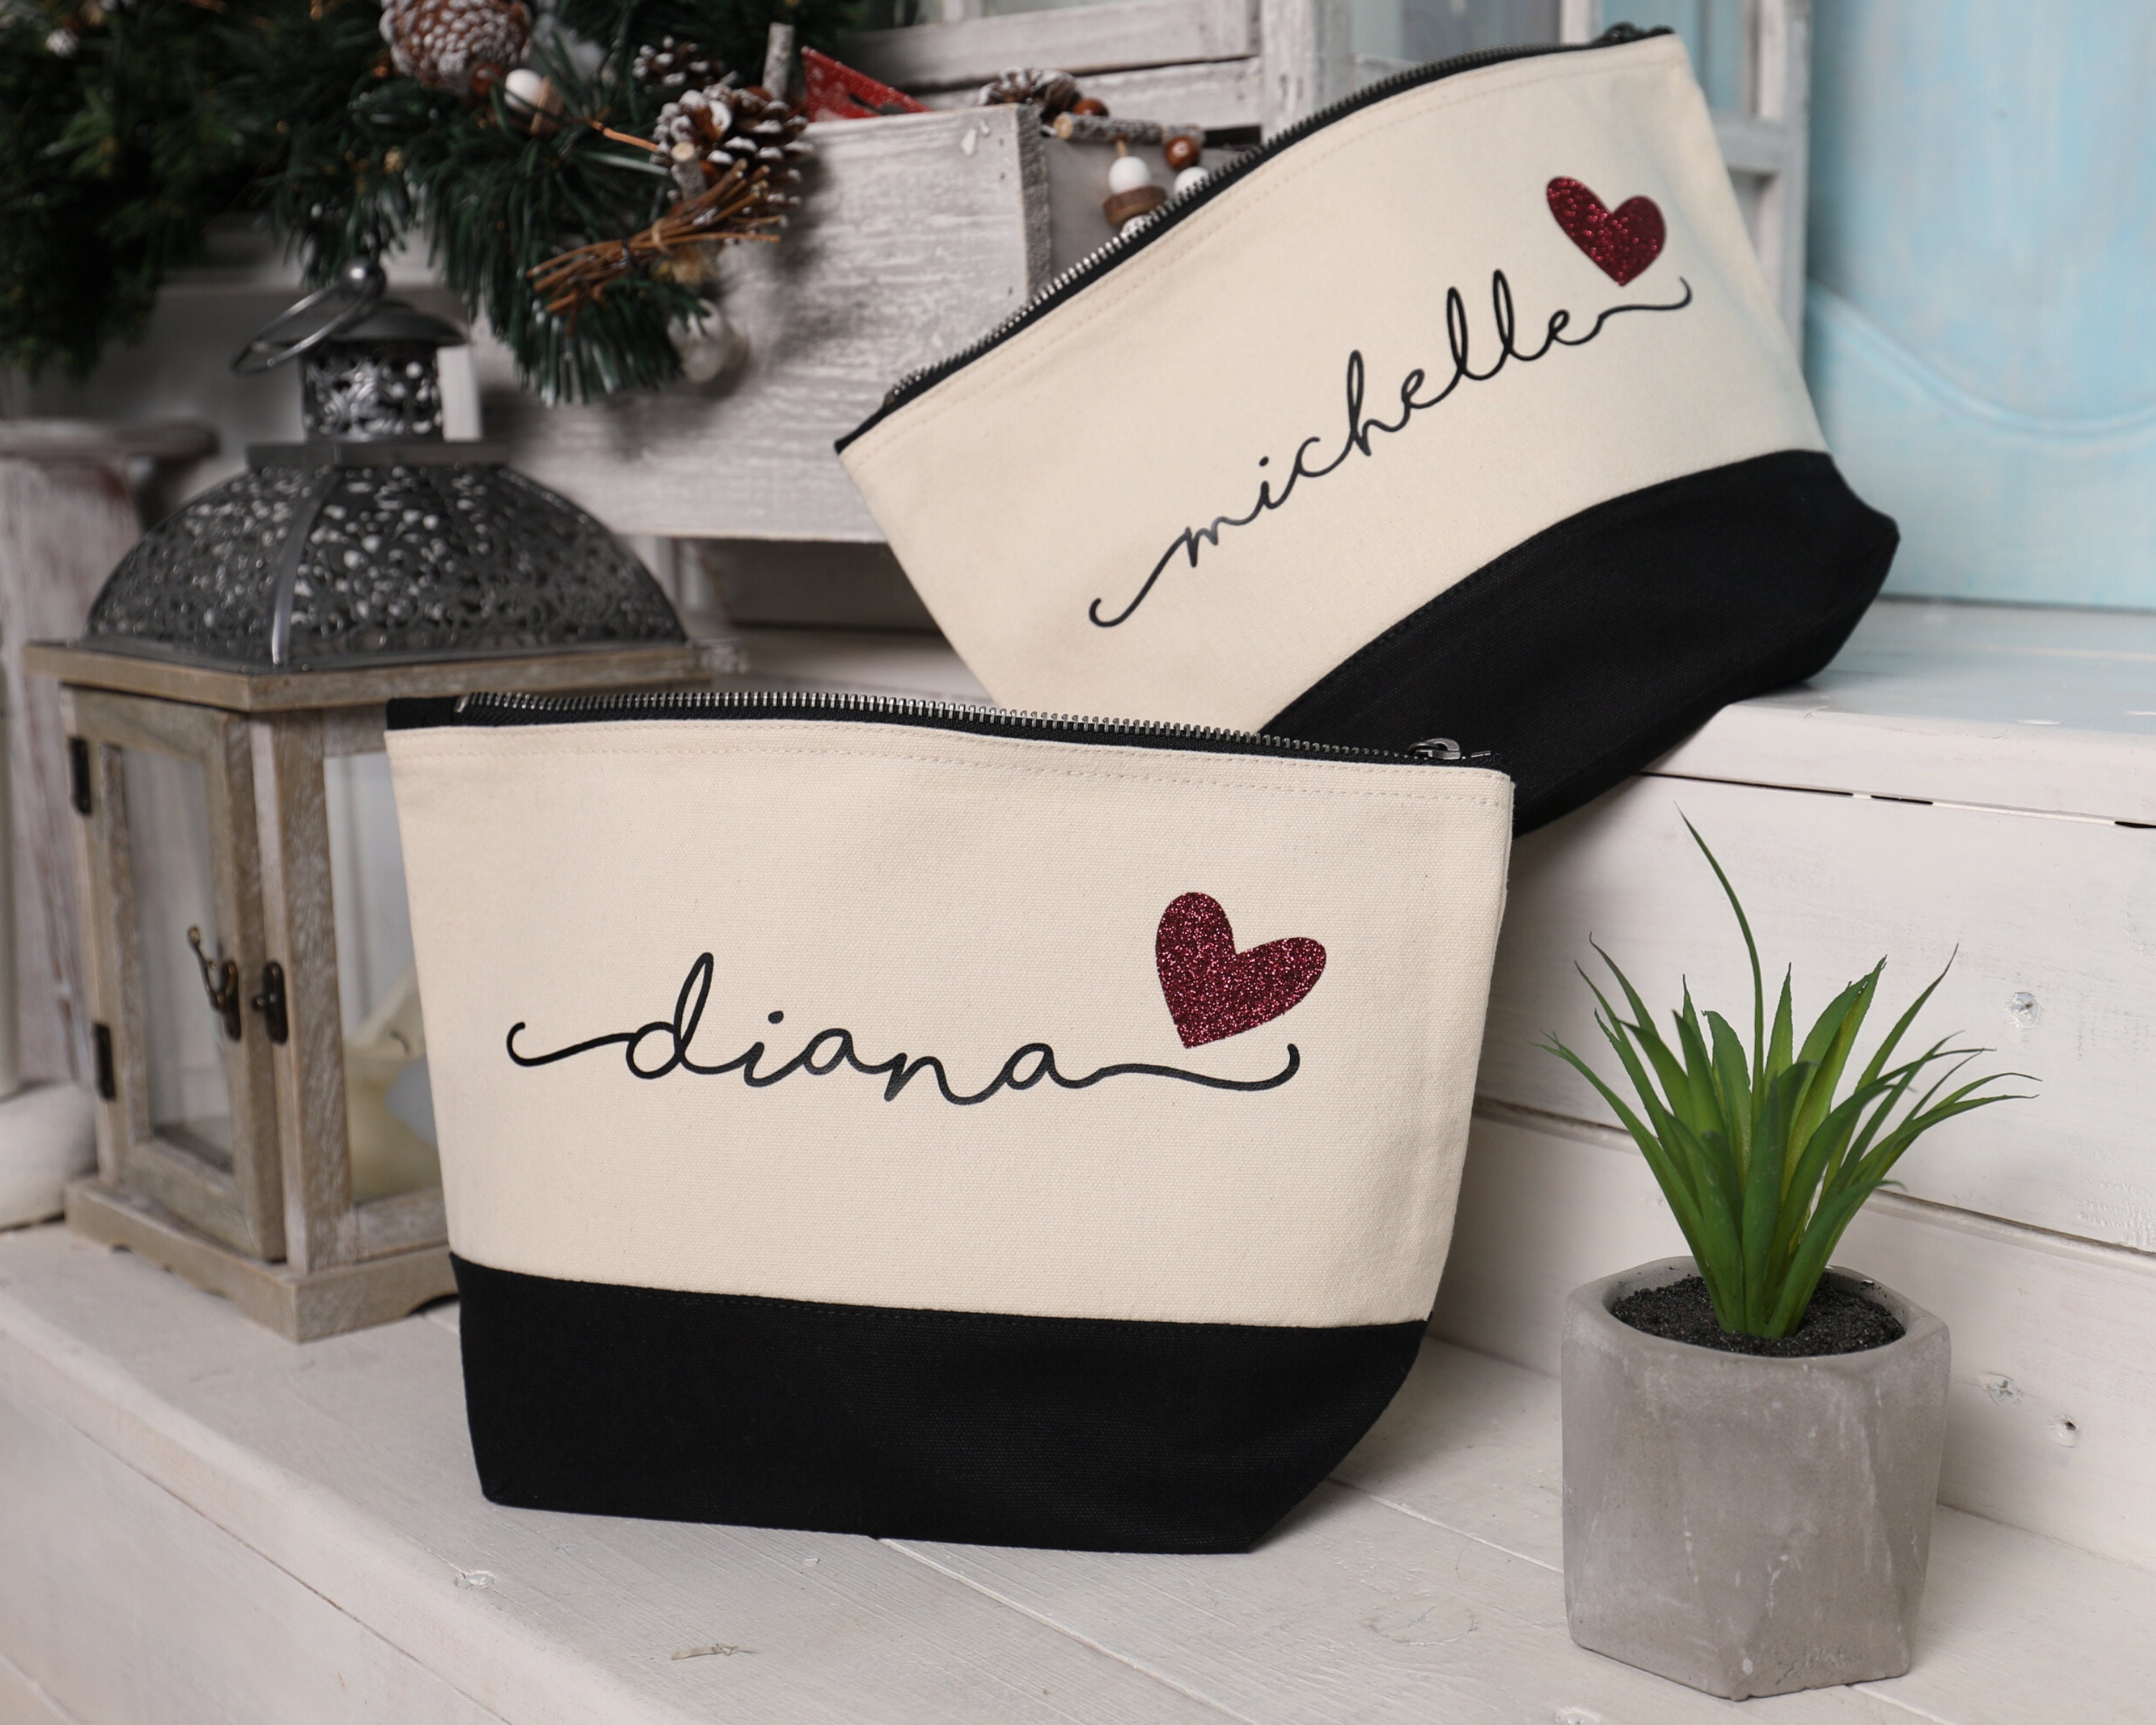 11. Personalized Cosmetic Bags